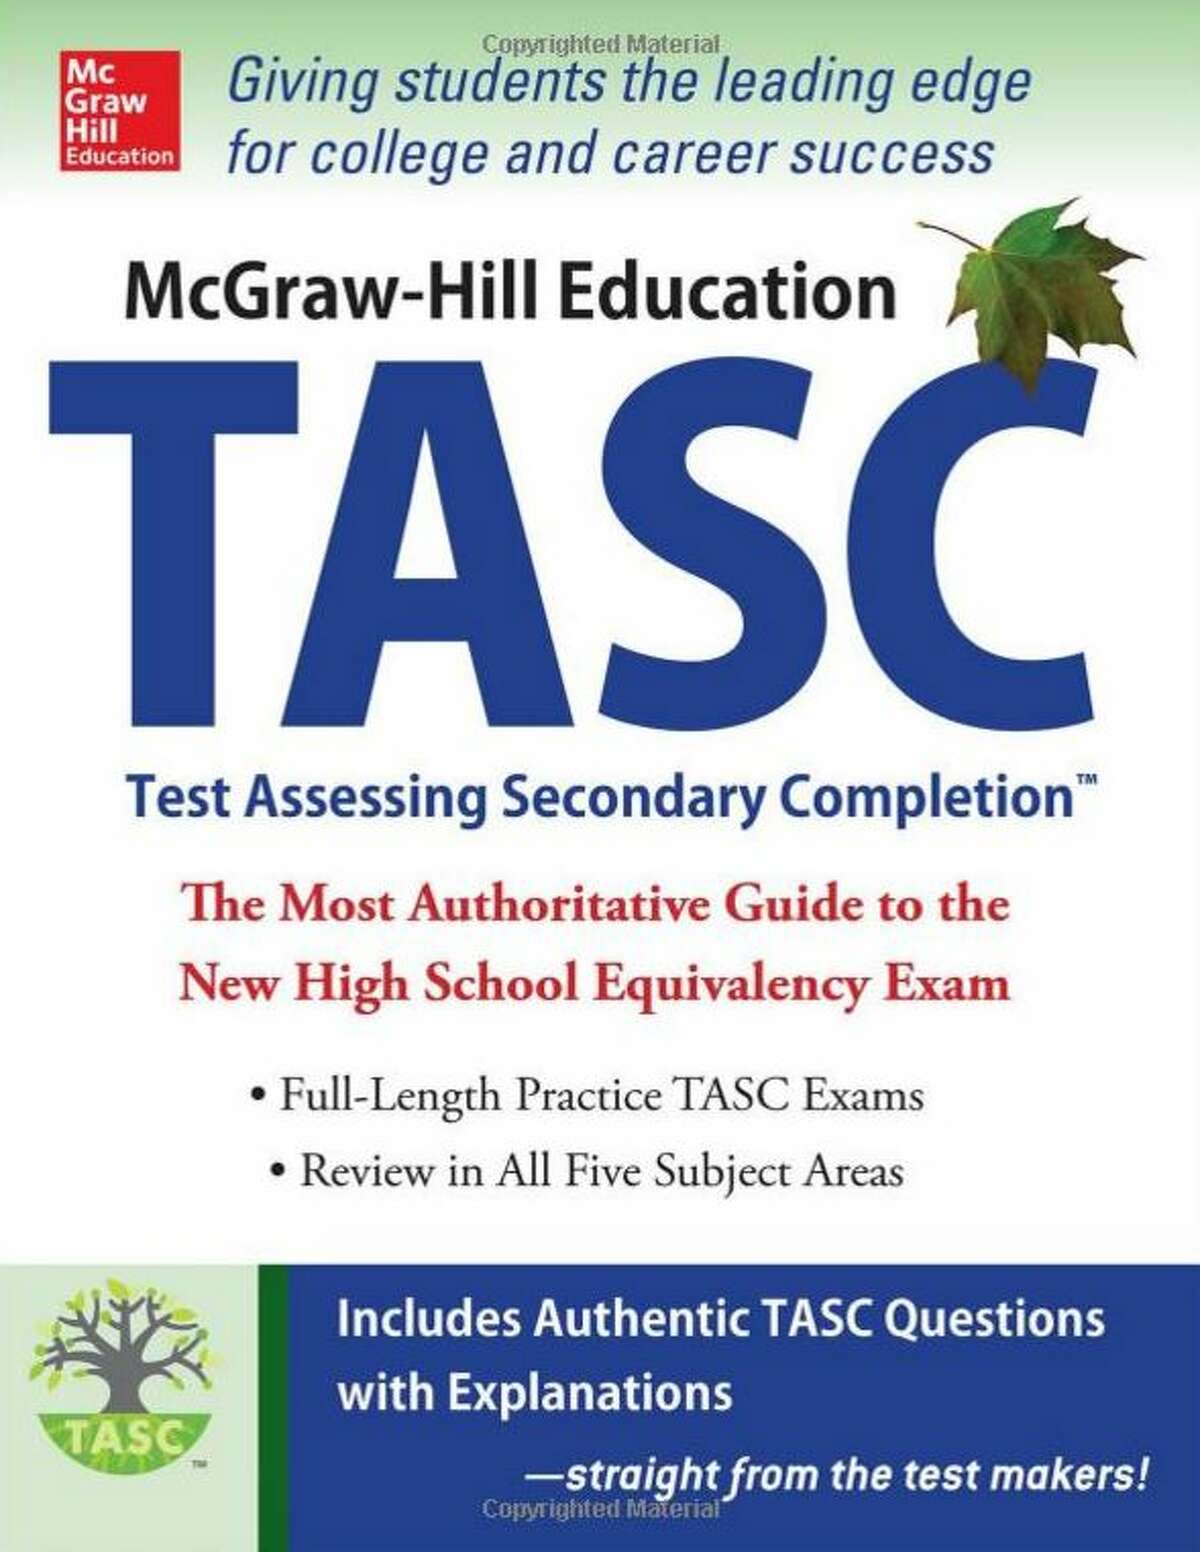 Albany Library — Arbor Hill / West Hill branch: "McGraw-Hill Education Preparation for the TASC (Test Assessing Secondary Completion)"